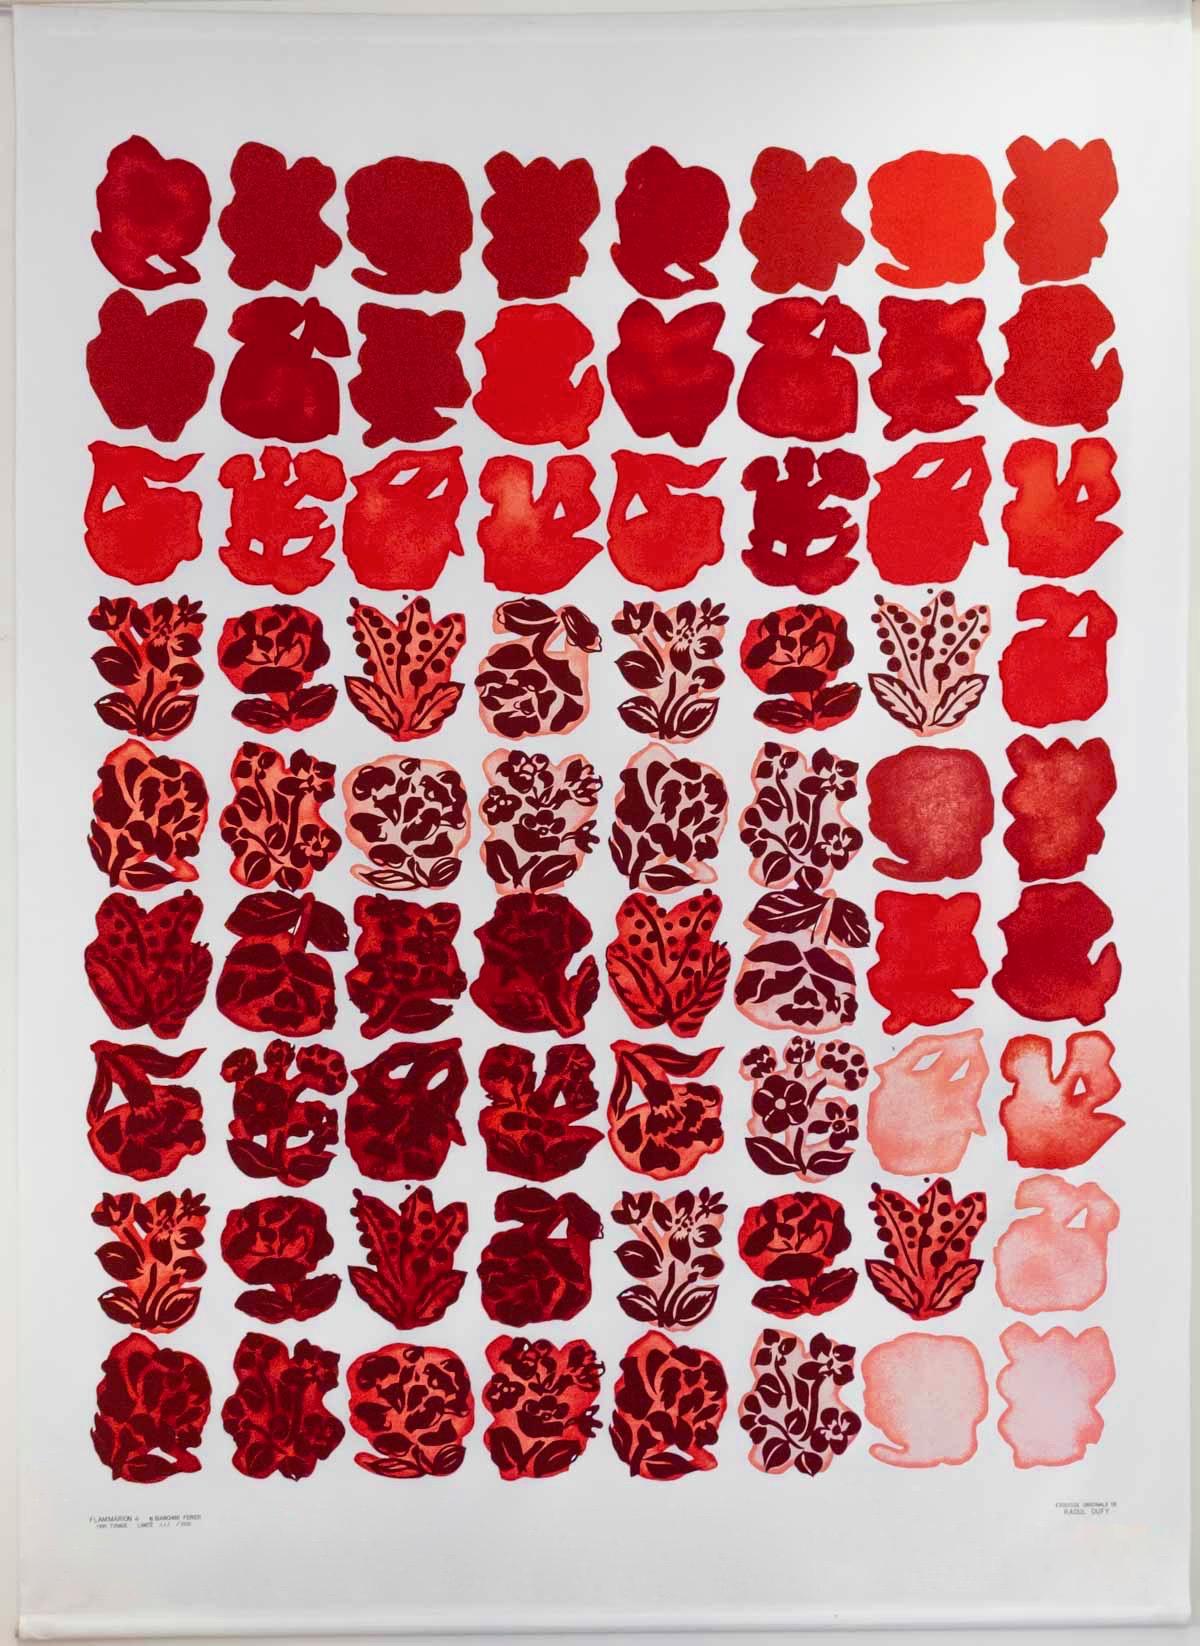 Wall screen printing on cotton white background, printed with stylized flowers, red color gradients from darker to lightest.

Raoul Duffy (1877-1953) Hanging 